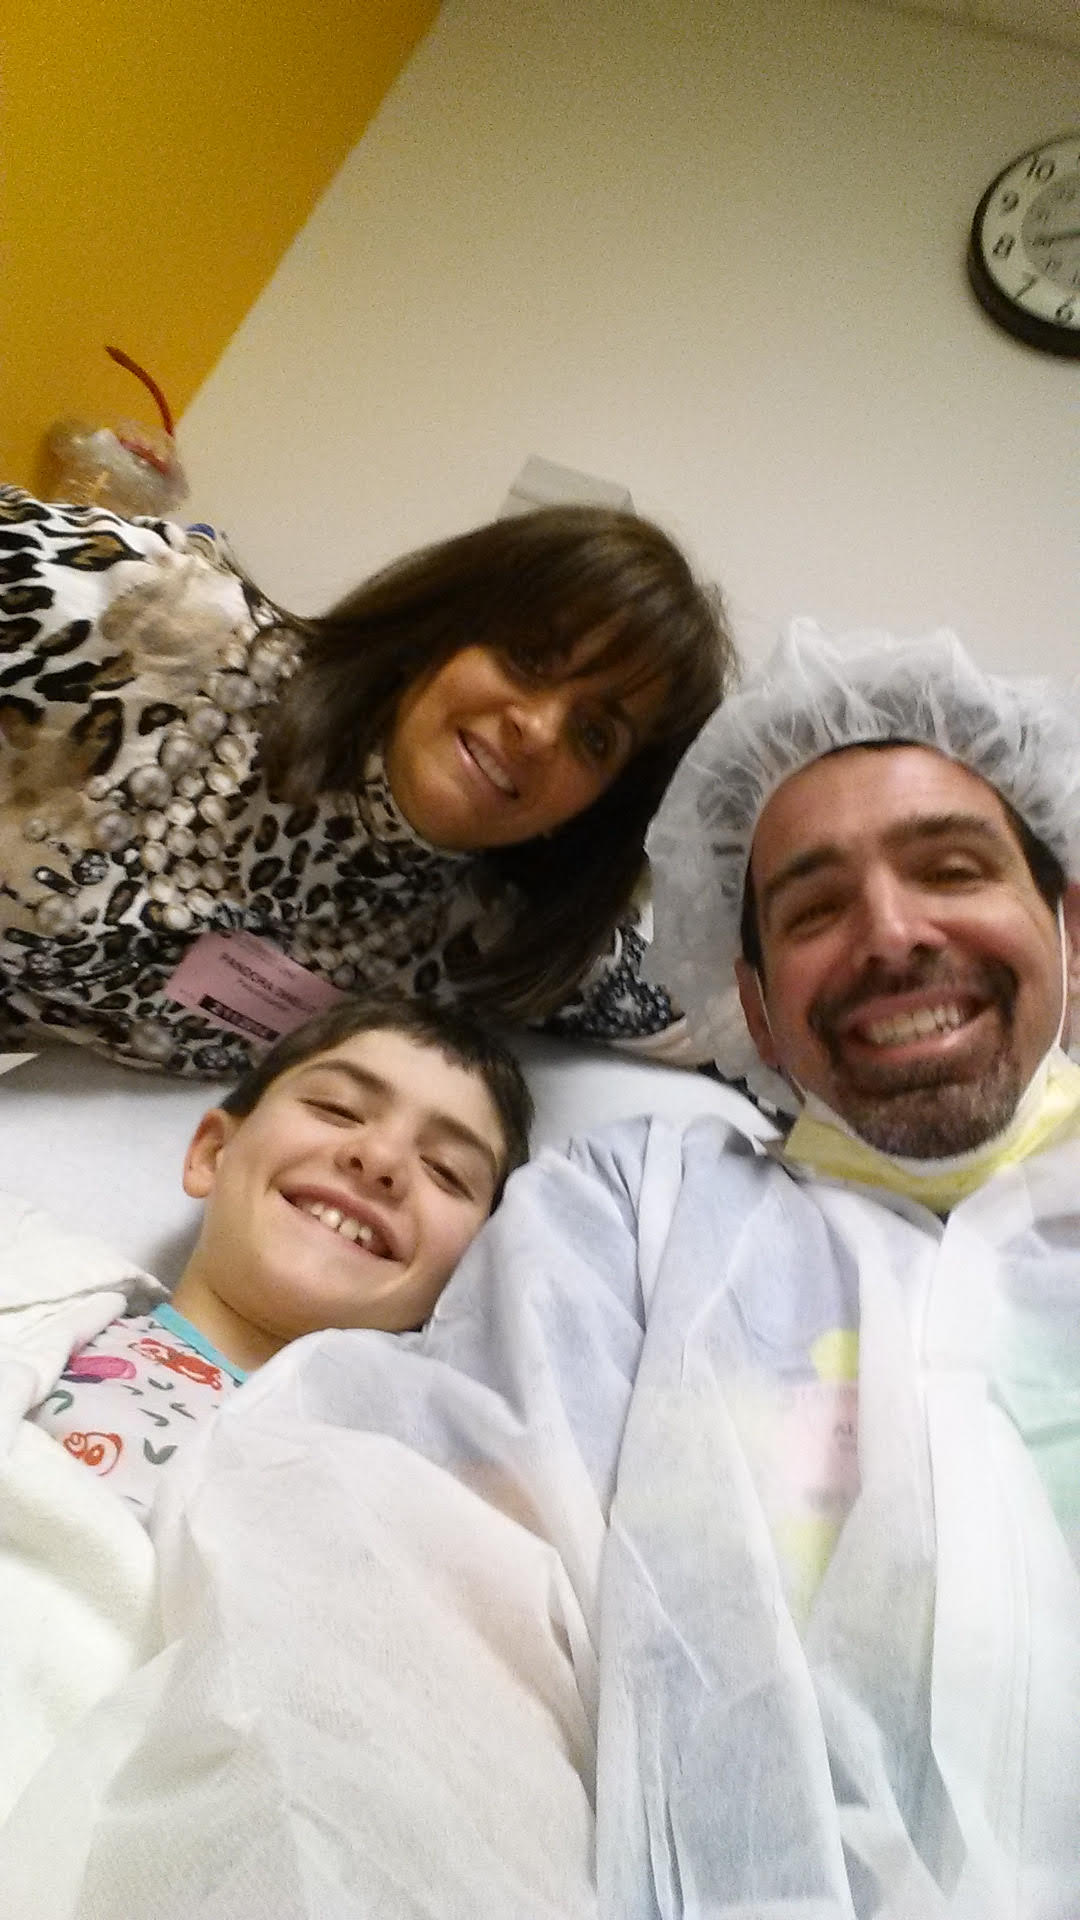 Antonio Dinello with his mother, Pandora, and his father, Al, while in the hospital in 2011.